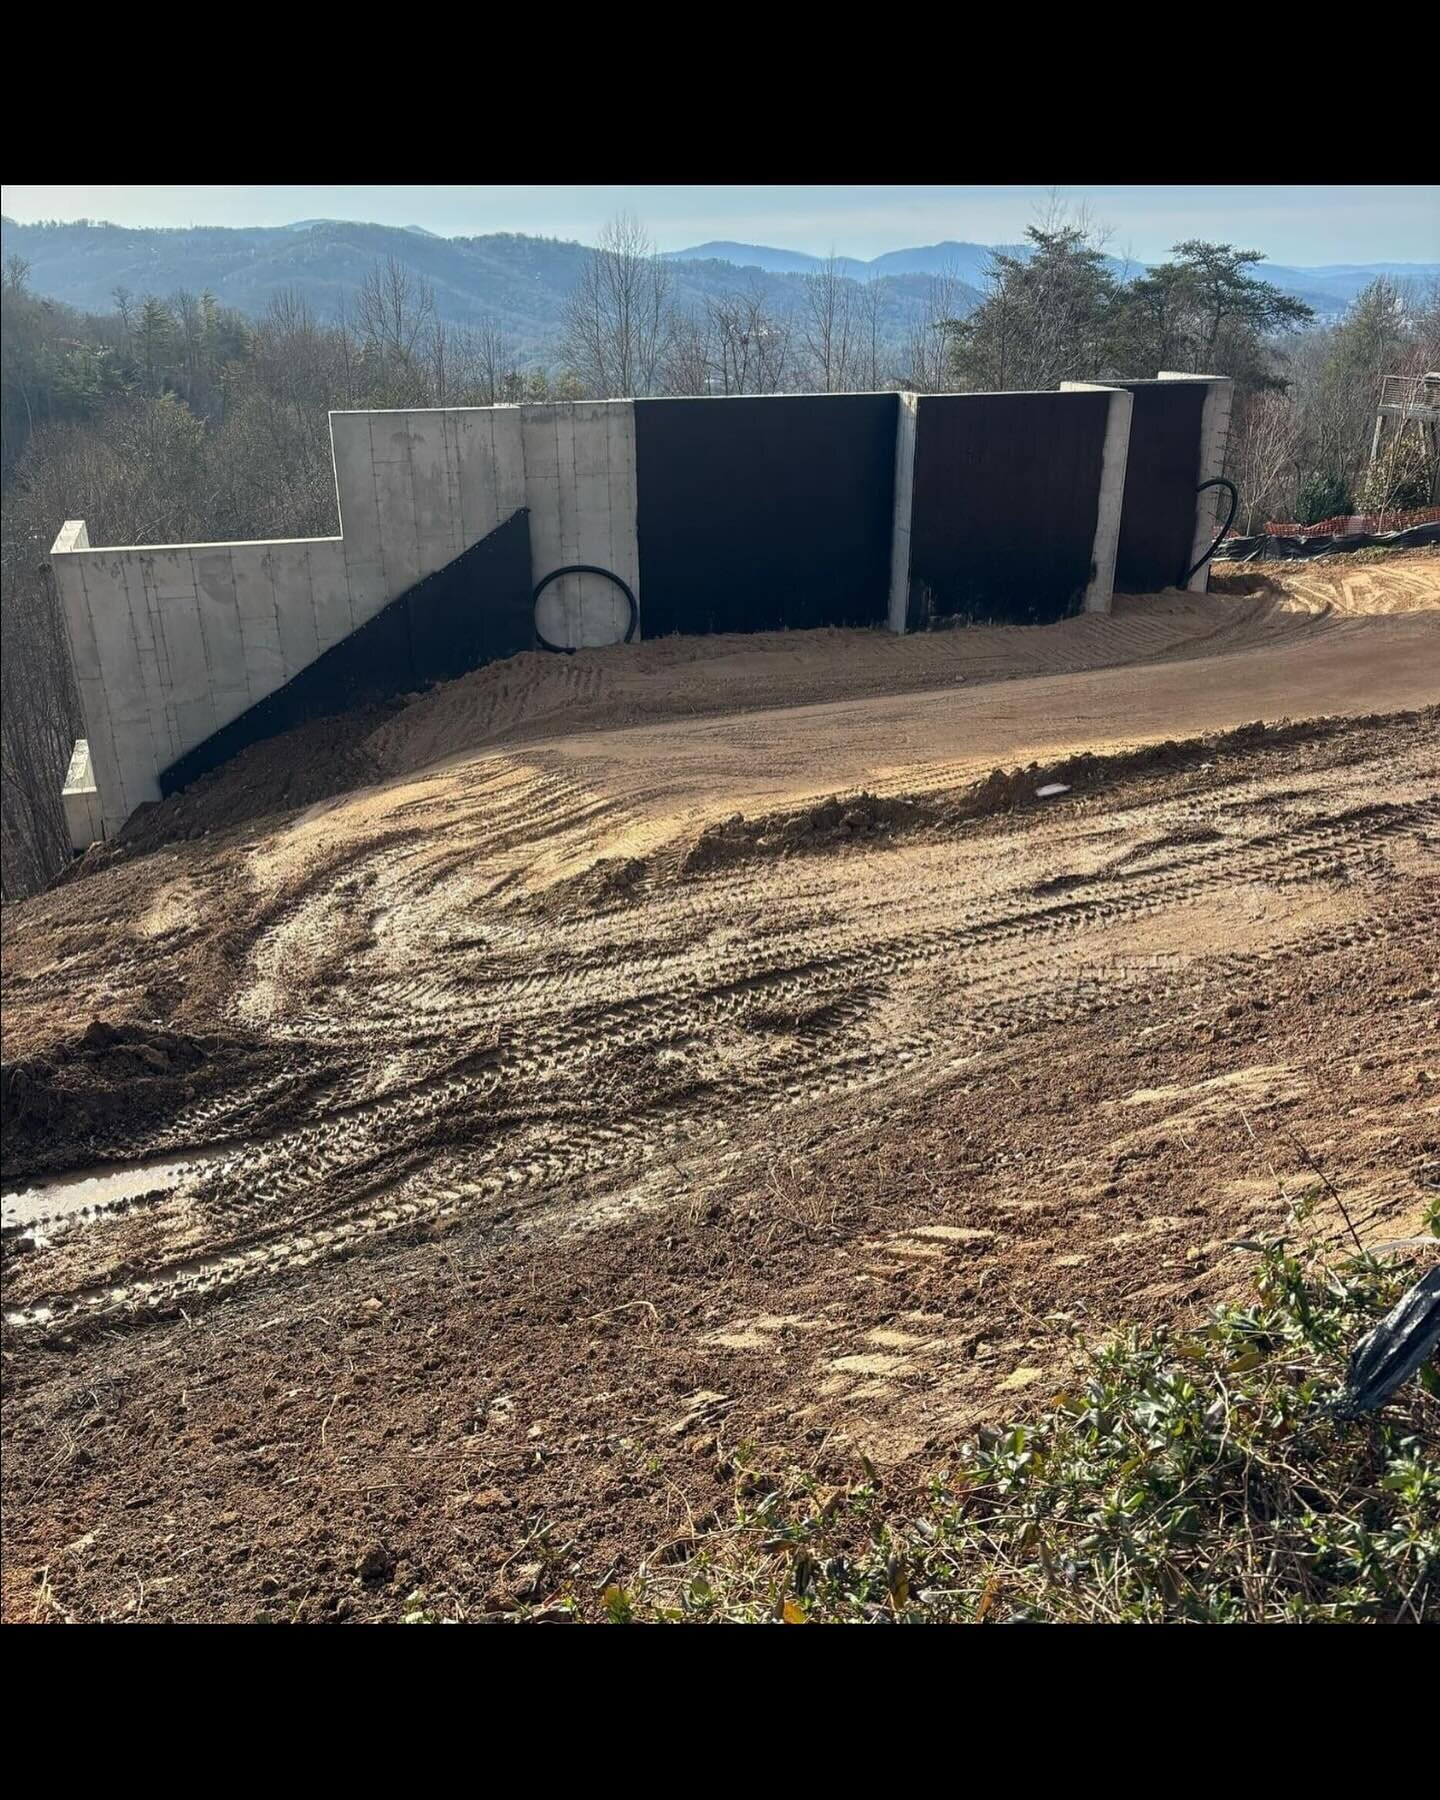 Our project with @mountainsoundbuilders, via their team &quot;this site has taken Geotech approval, grading, dirt delivery, filling, testing, compacting just to get this home ready to continue foundation&quot;...WOW!! @augustinteriors @mountainsoundb